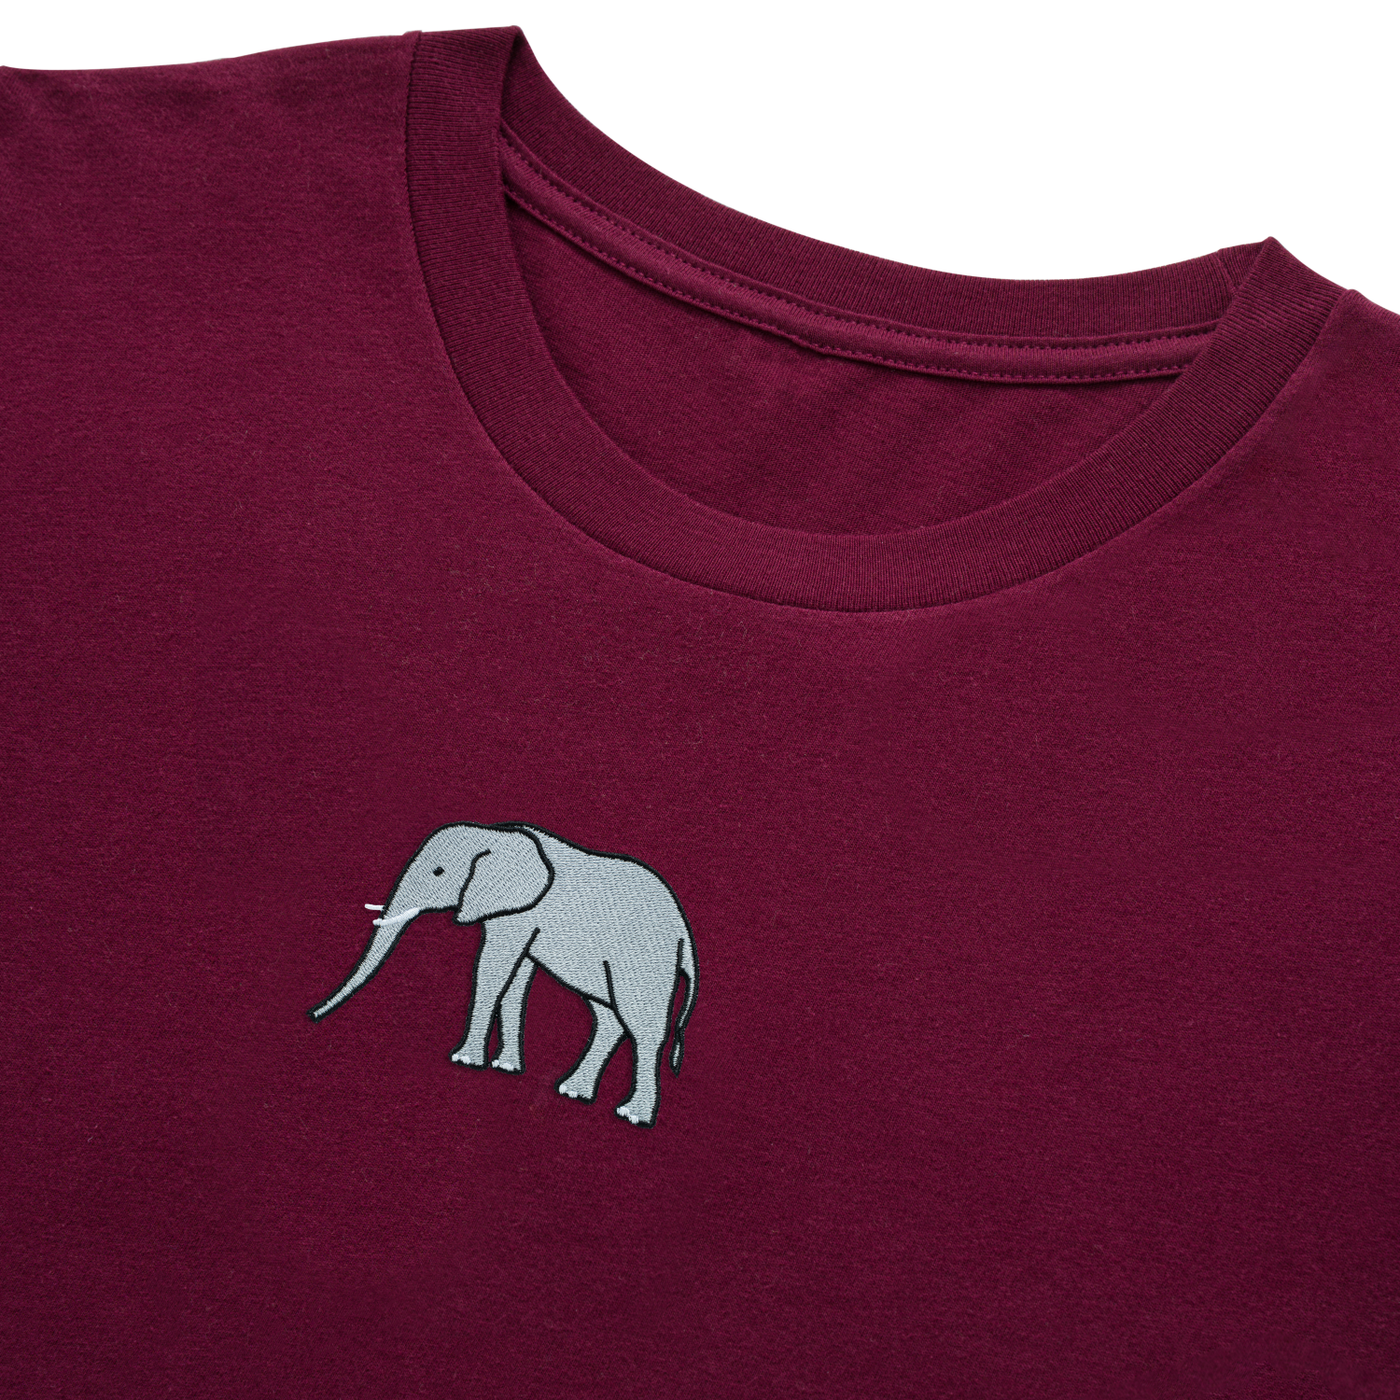 Bobby's Planet Men's Embroidered Elephant Long Sleeve Shirt from African Animals Collection in Maroon Color#color_maroon